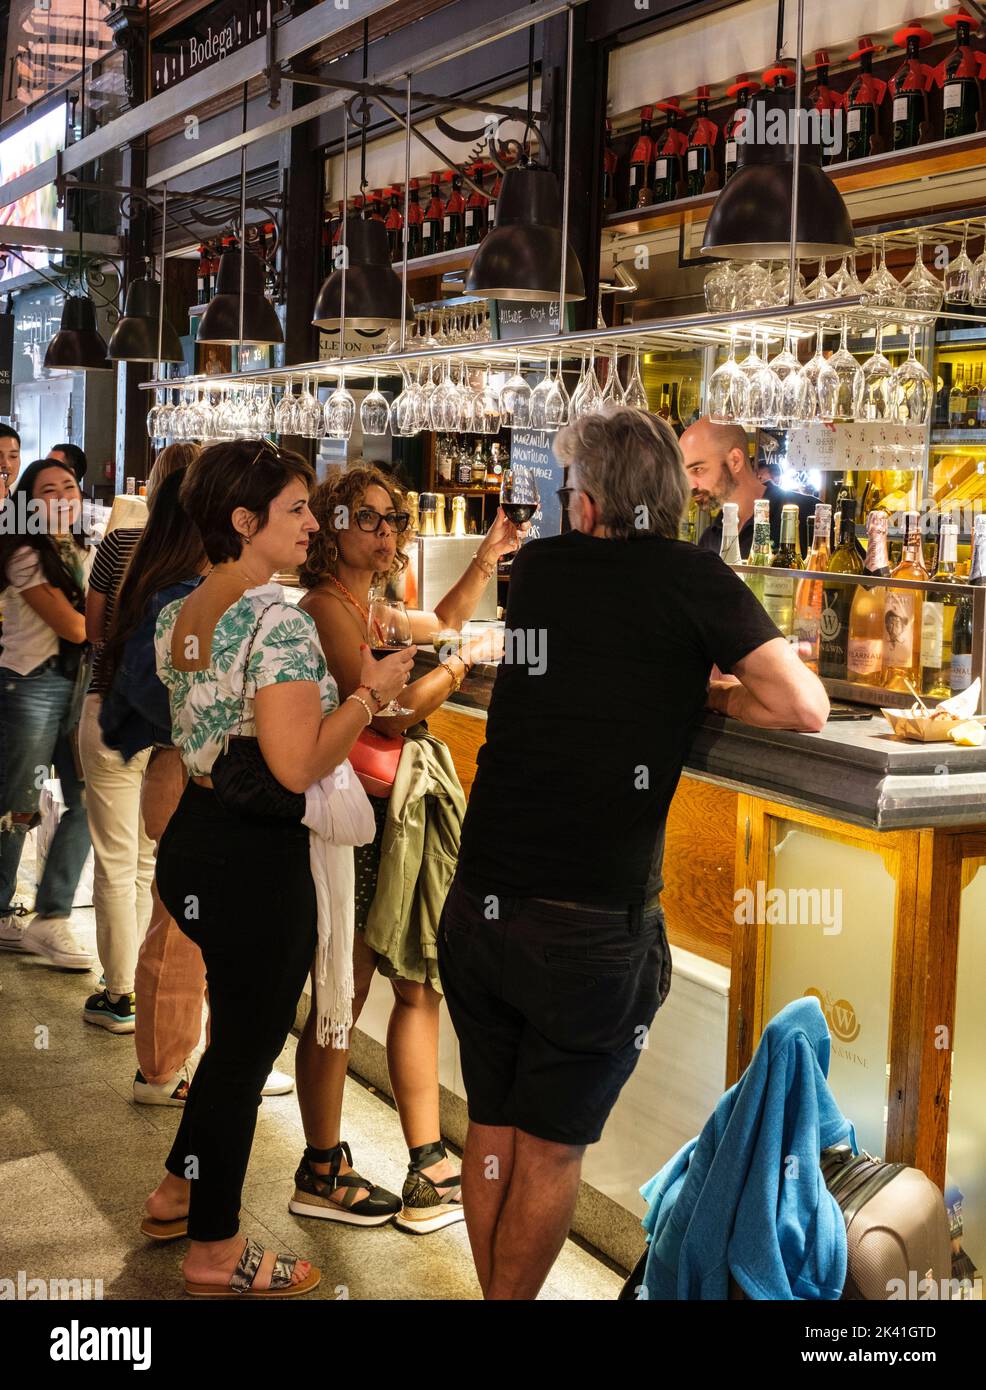 Spain, Madrid. Market of San Miguel. Customers at a Wine Bar. Stock Photo